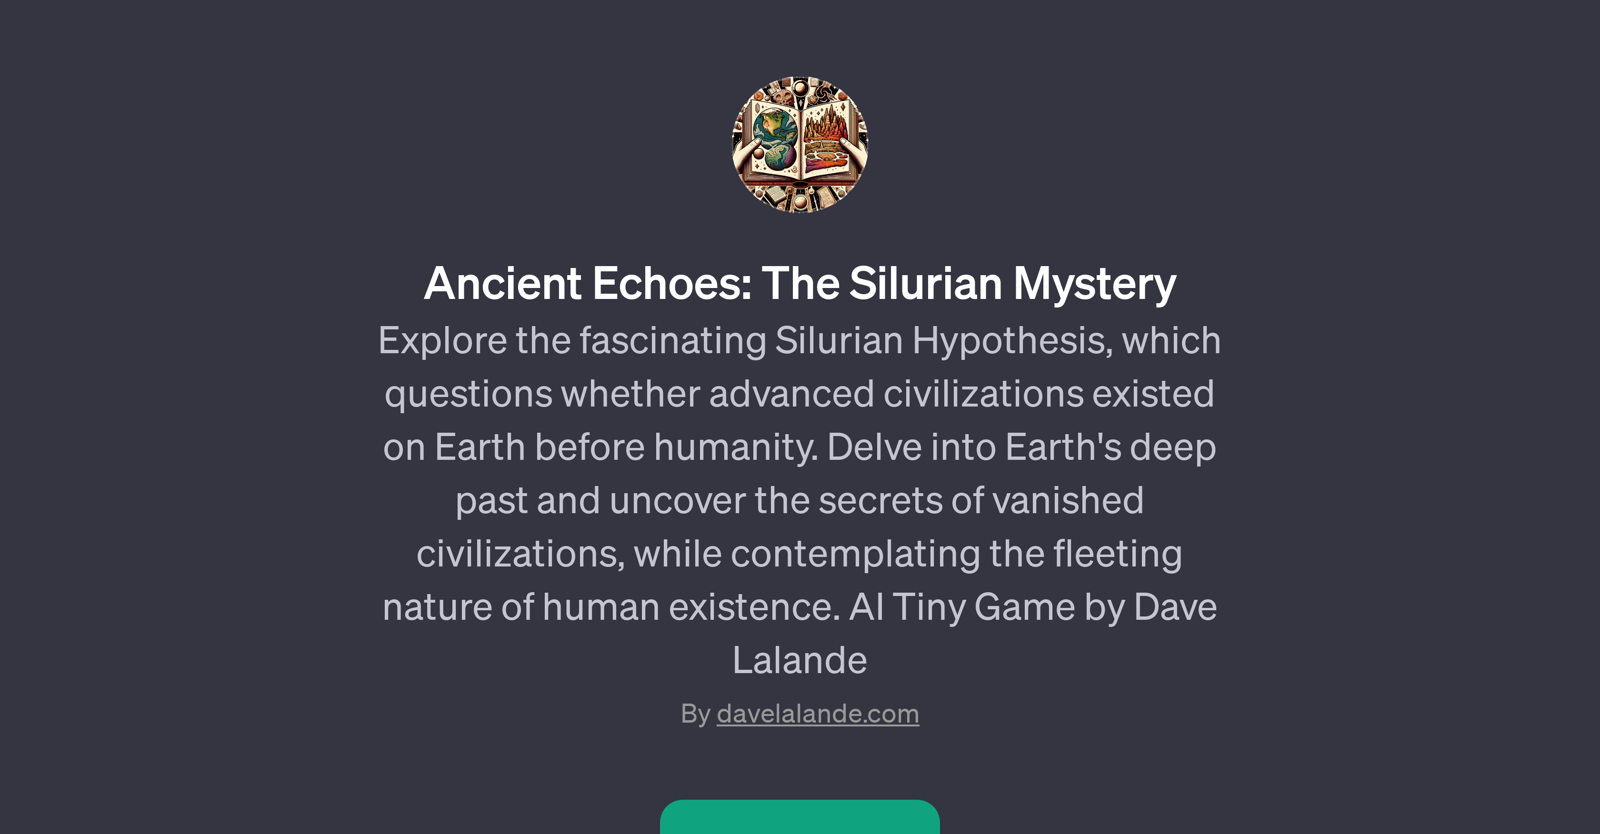 Ancient Echoes: The Silurian Mystery website